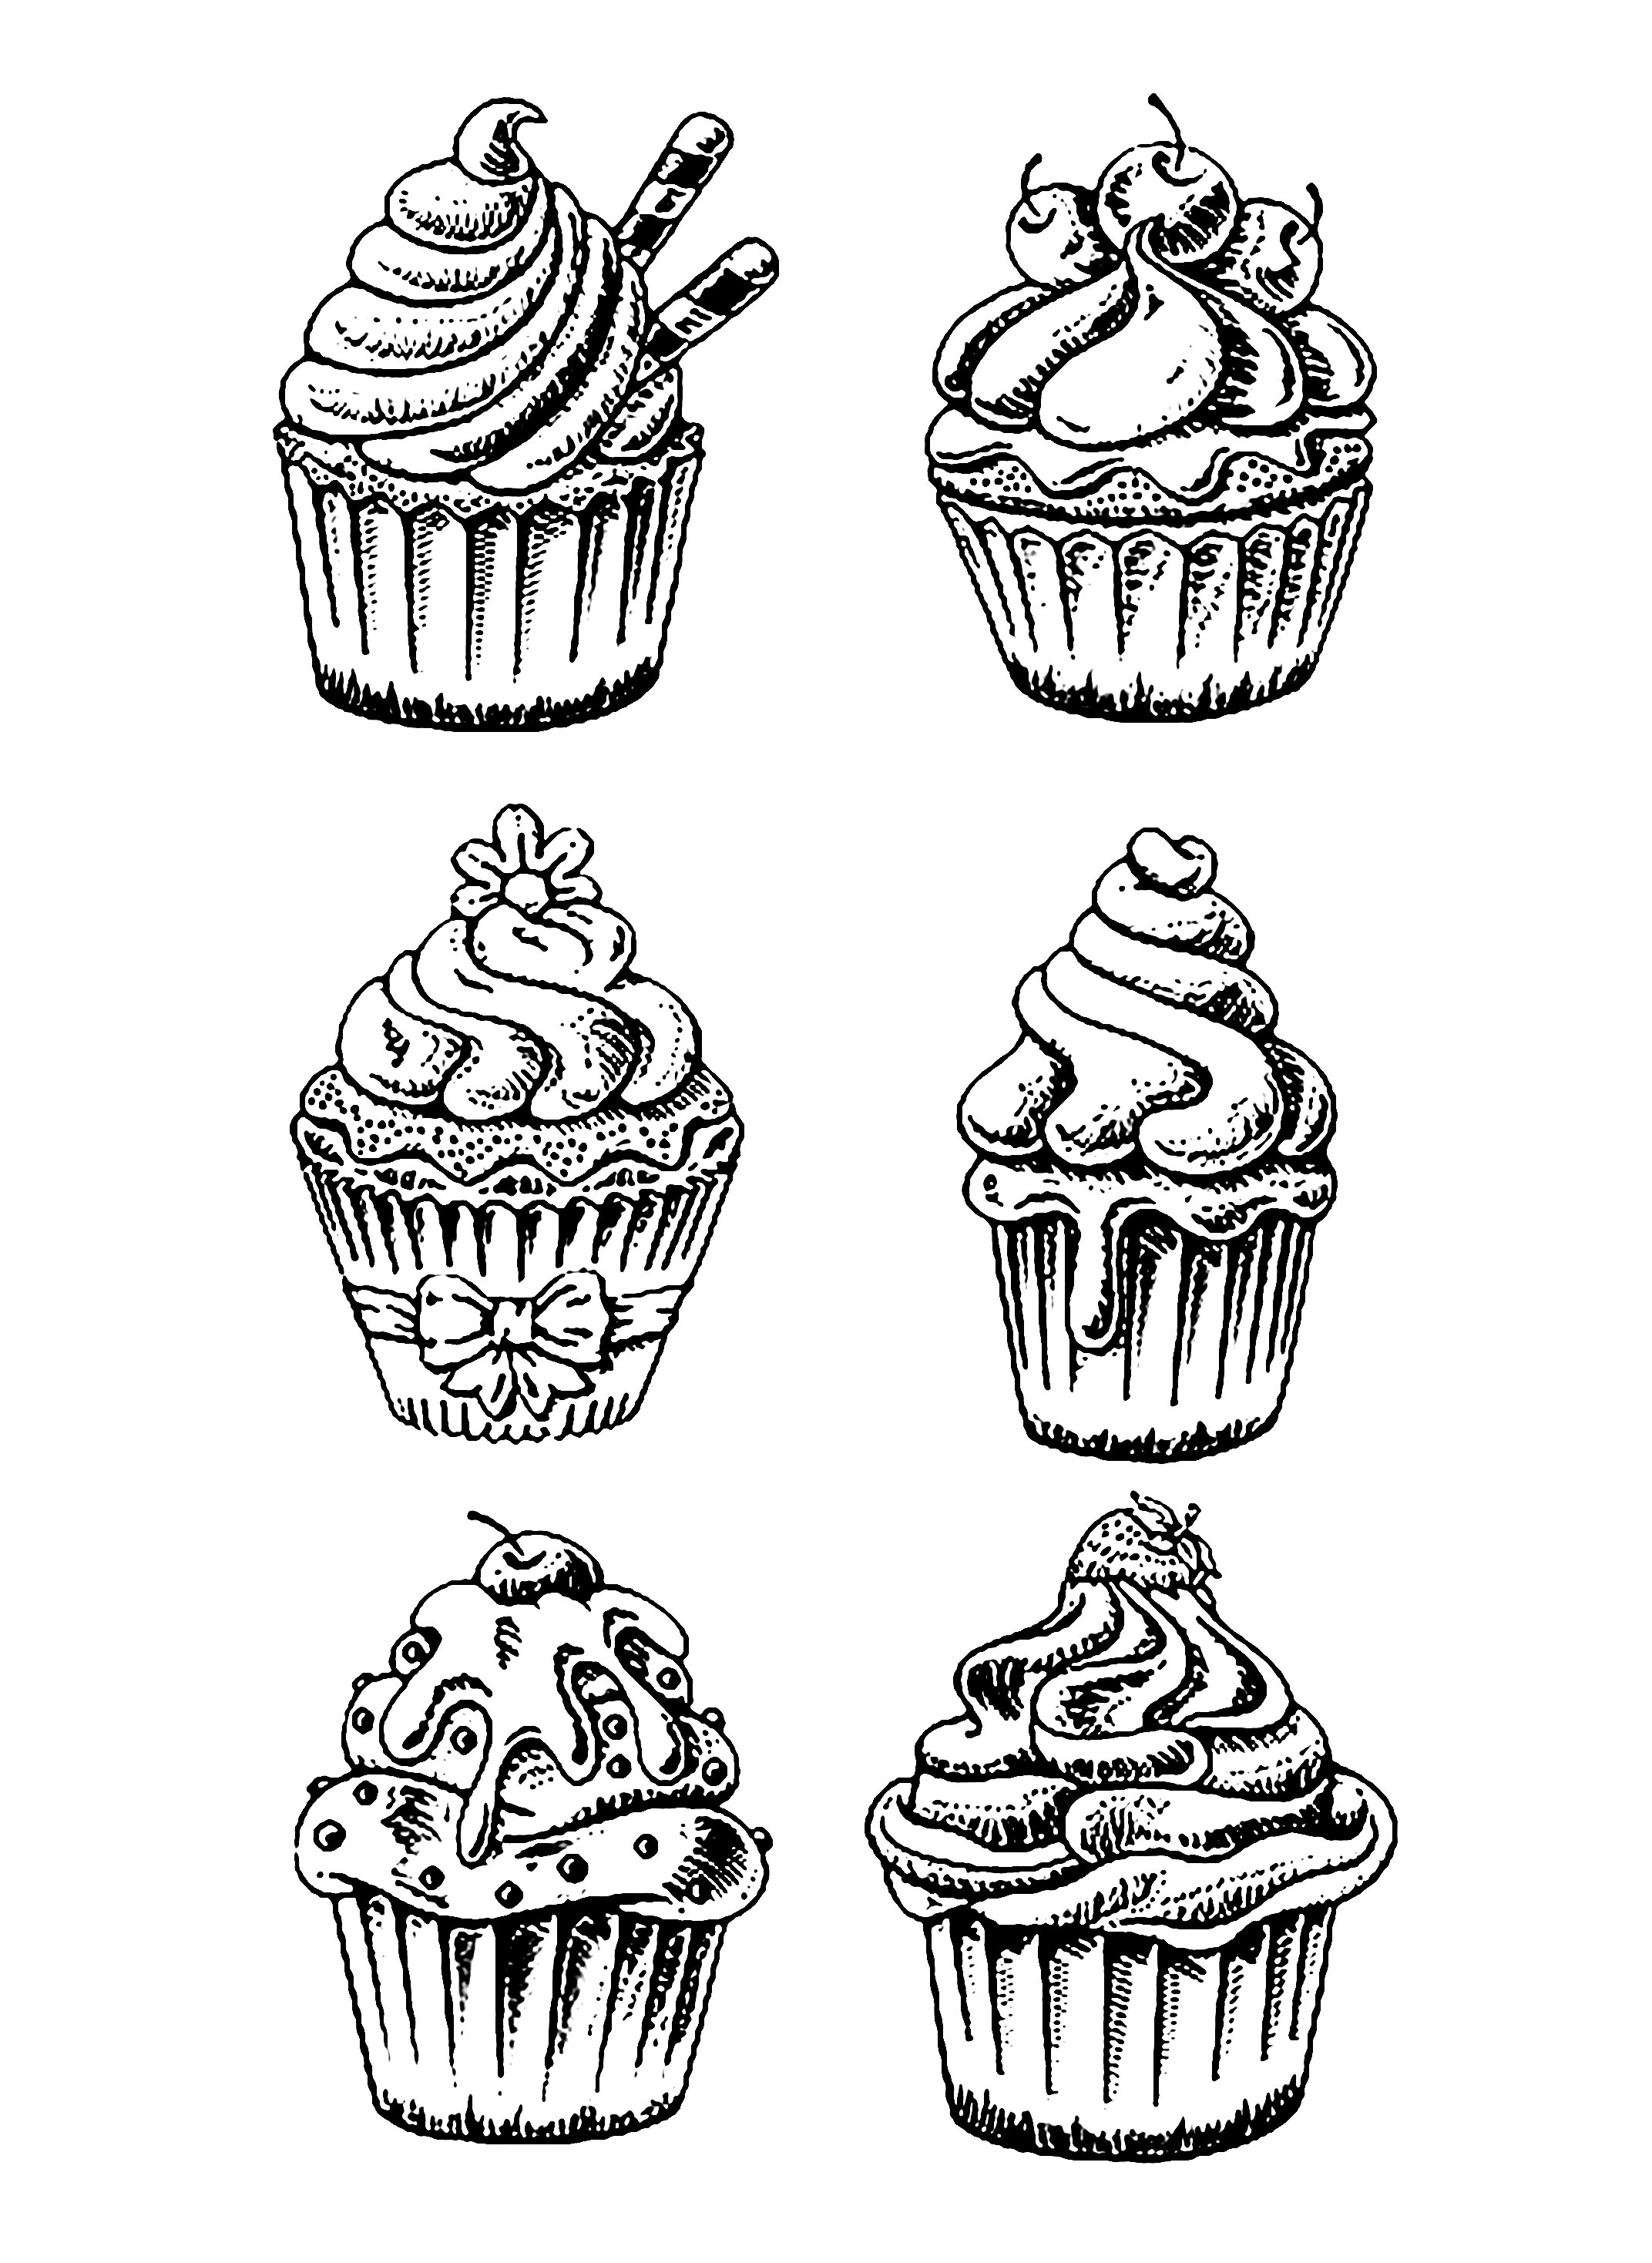 Six good cupcakes Cupcakes Adult Coloring Pages